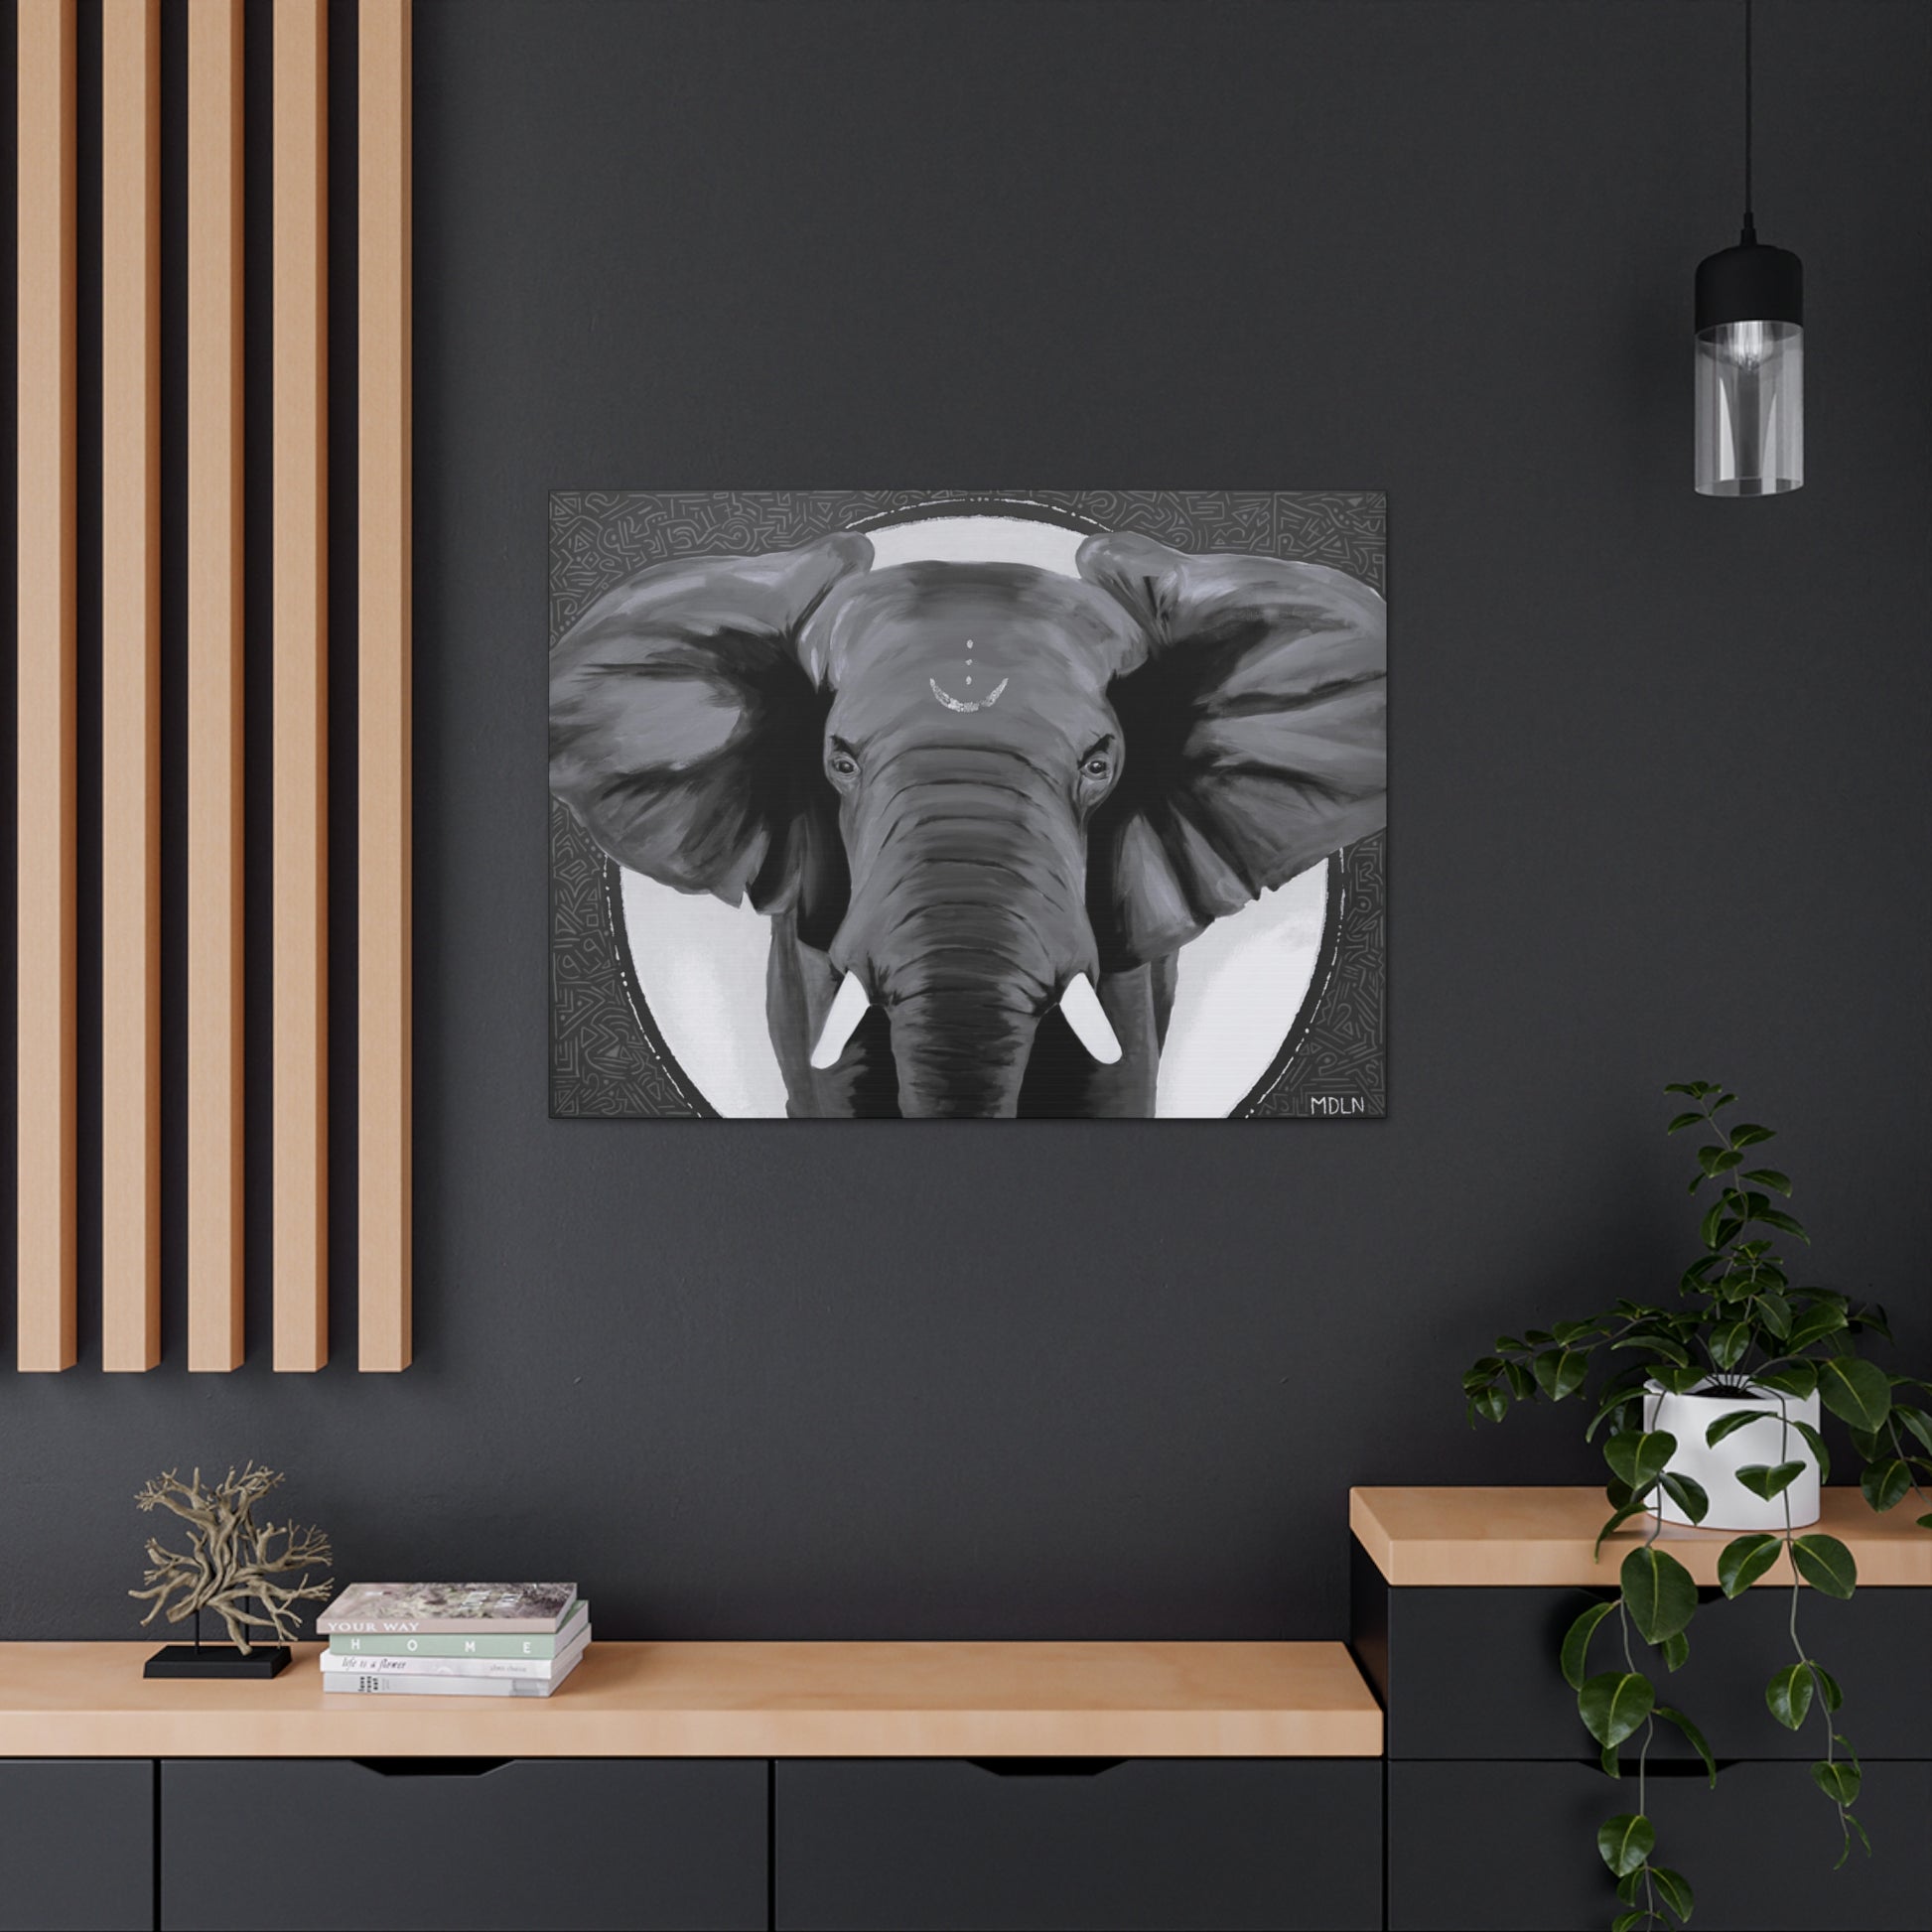 Black, grey and white canvas print of an African elephant hanging on a black wall of an office